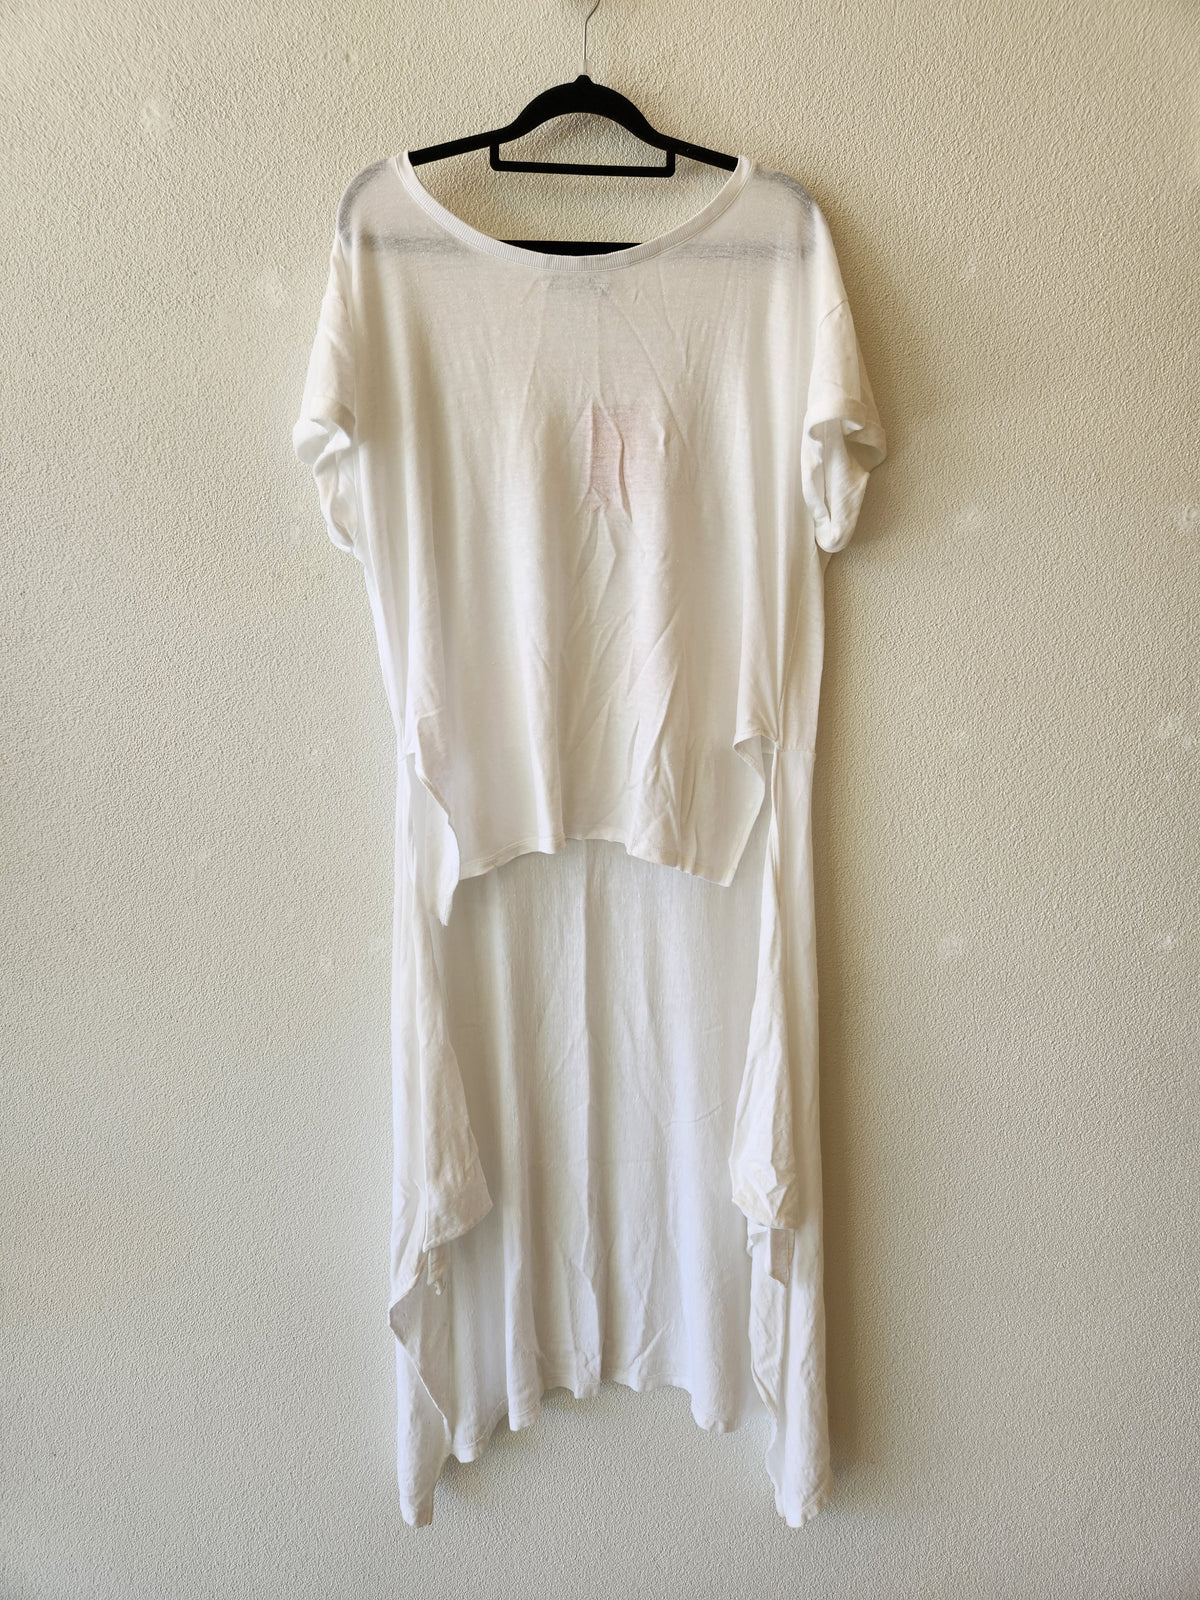 Polo Ralph Lauren White Layer top Large